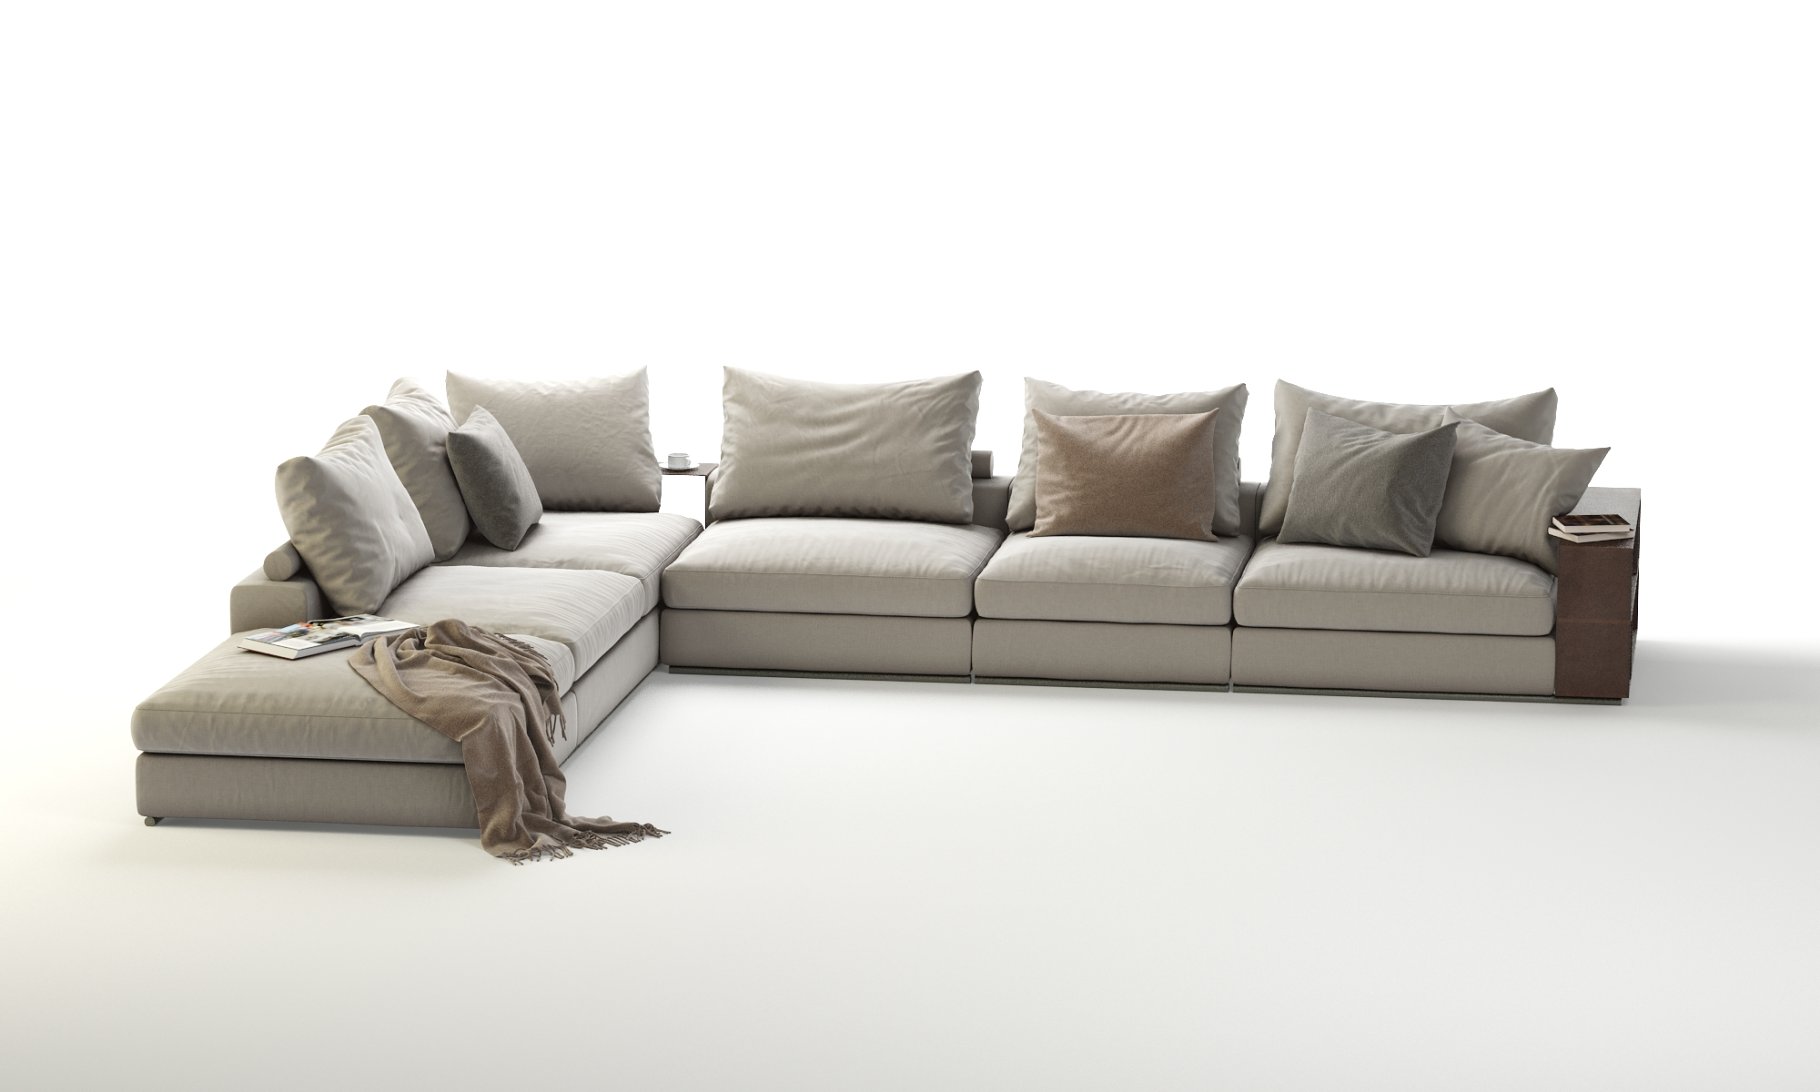 Images of an enchanting 3D model of a corner sectional sofa